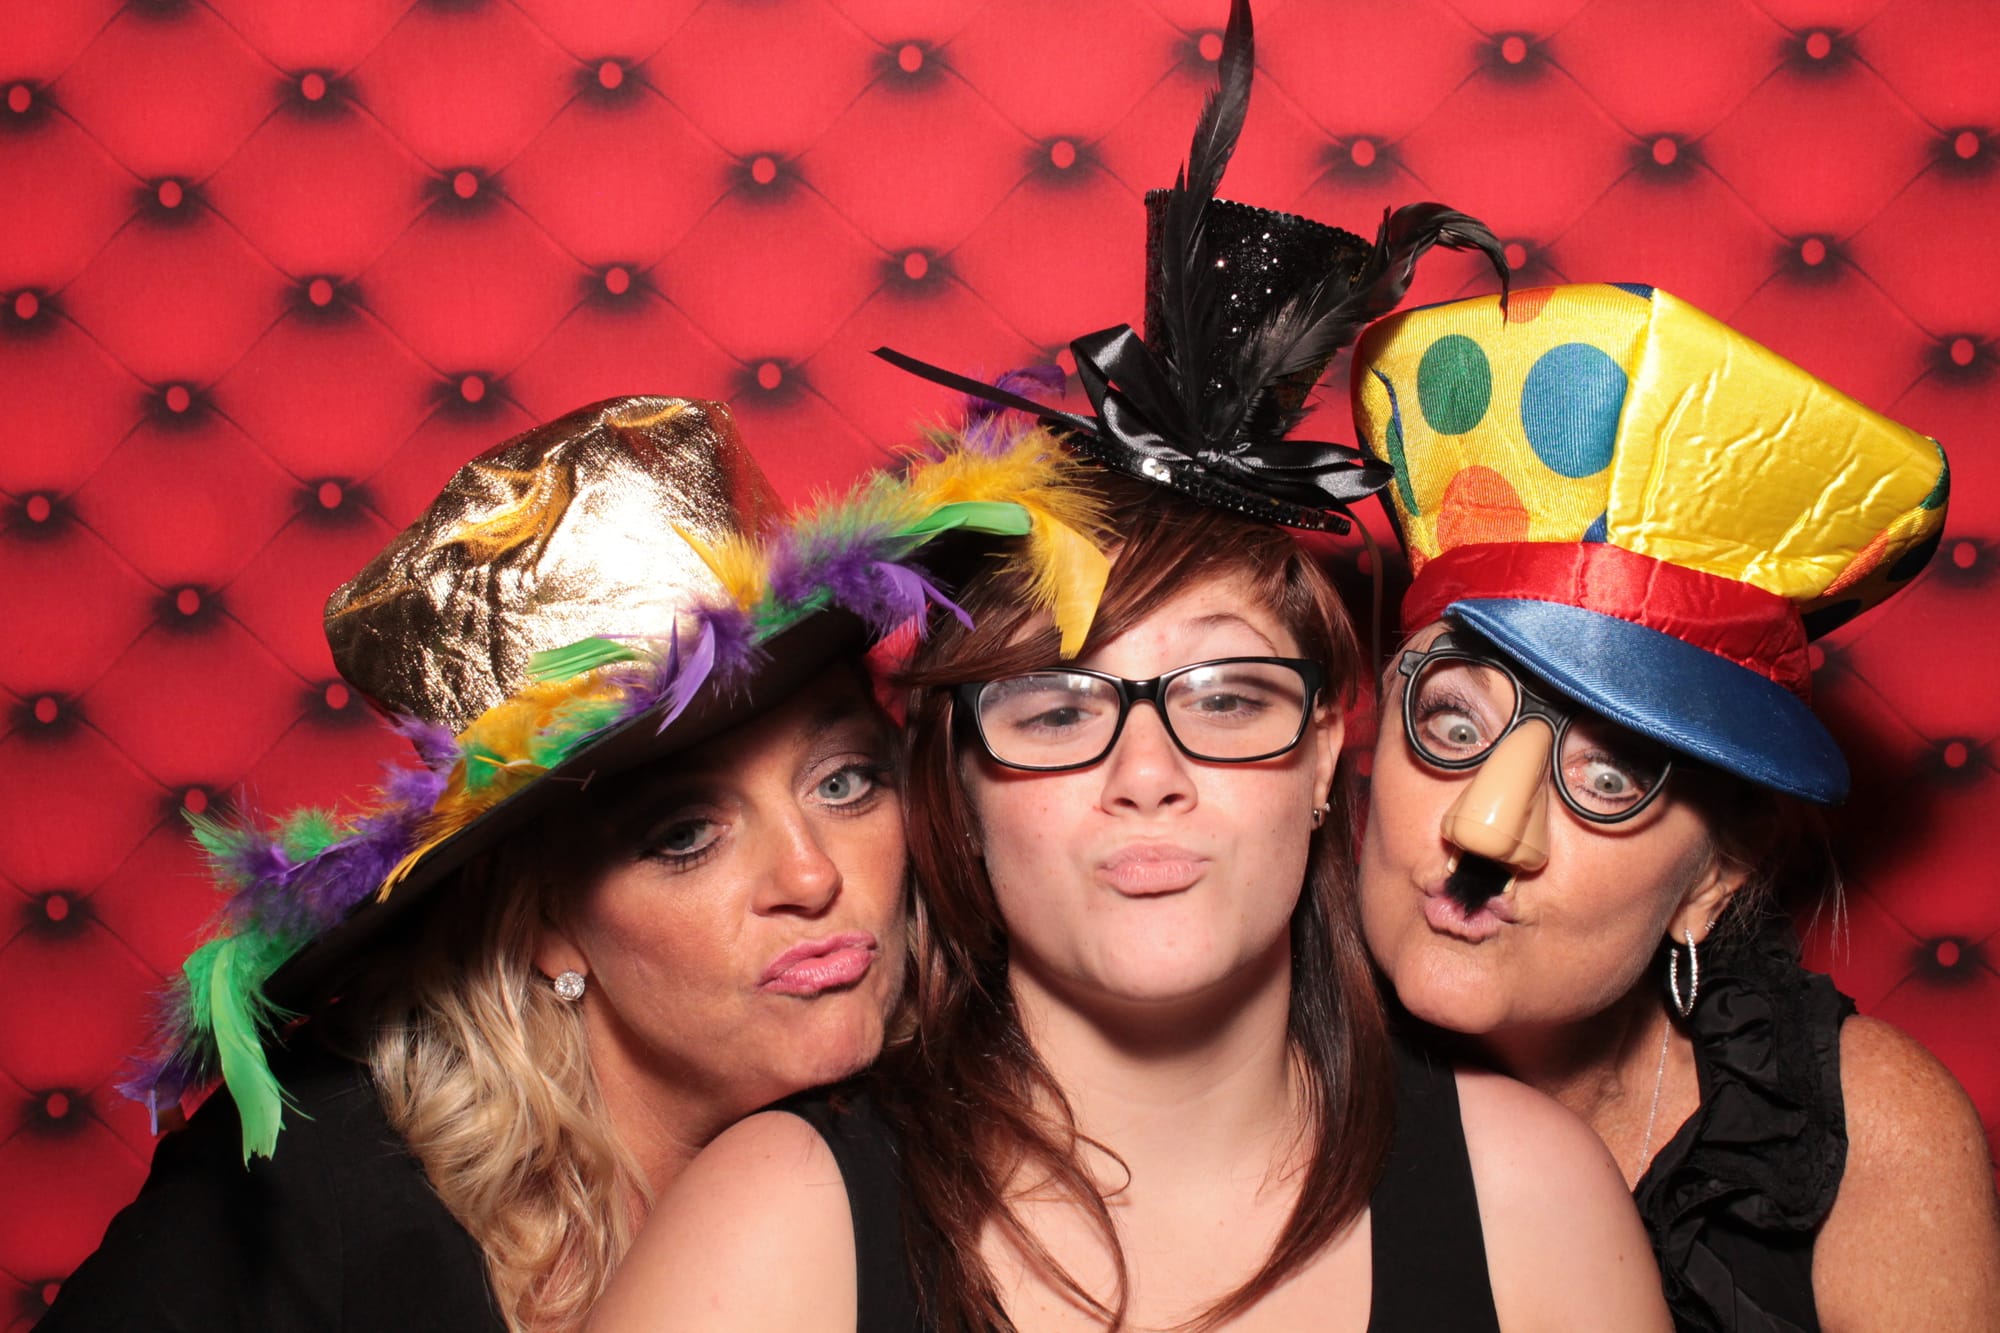 Photo Booth-Rental-Kyle-Austin-Texas-No. 1-Best-Memories-Props-Wedding-Reception-Awesome